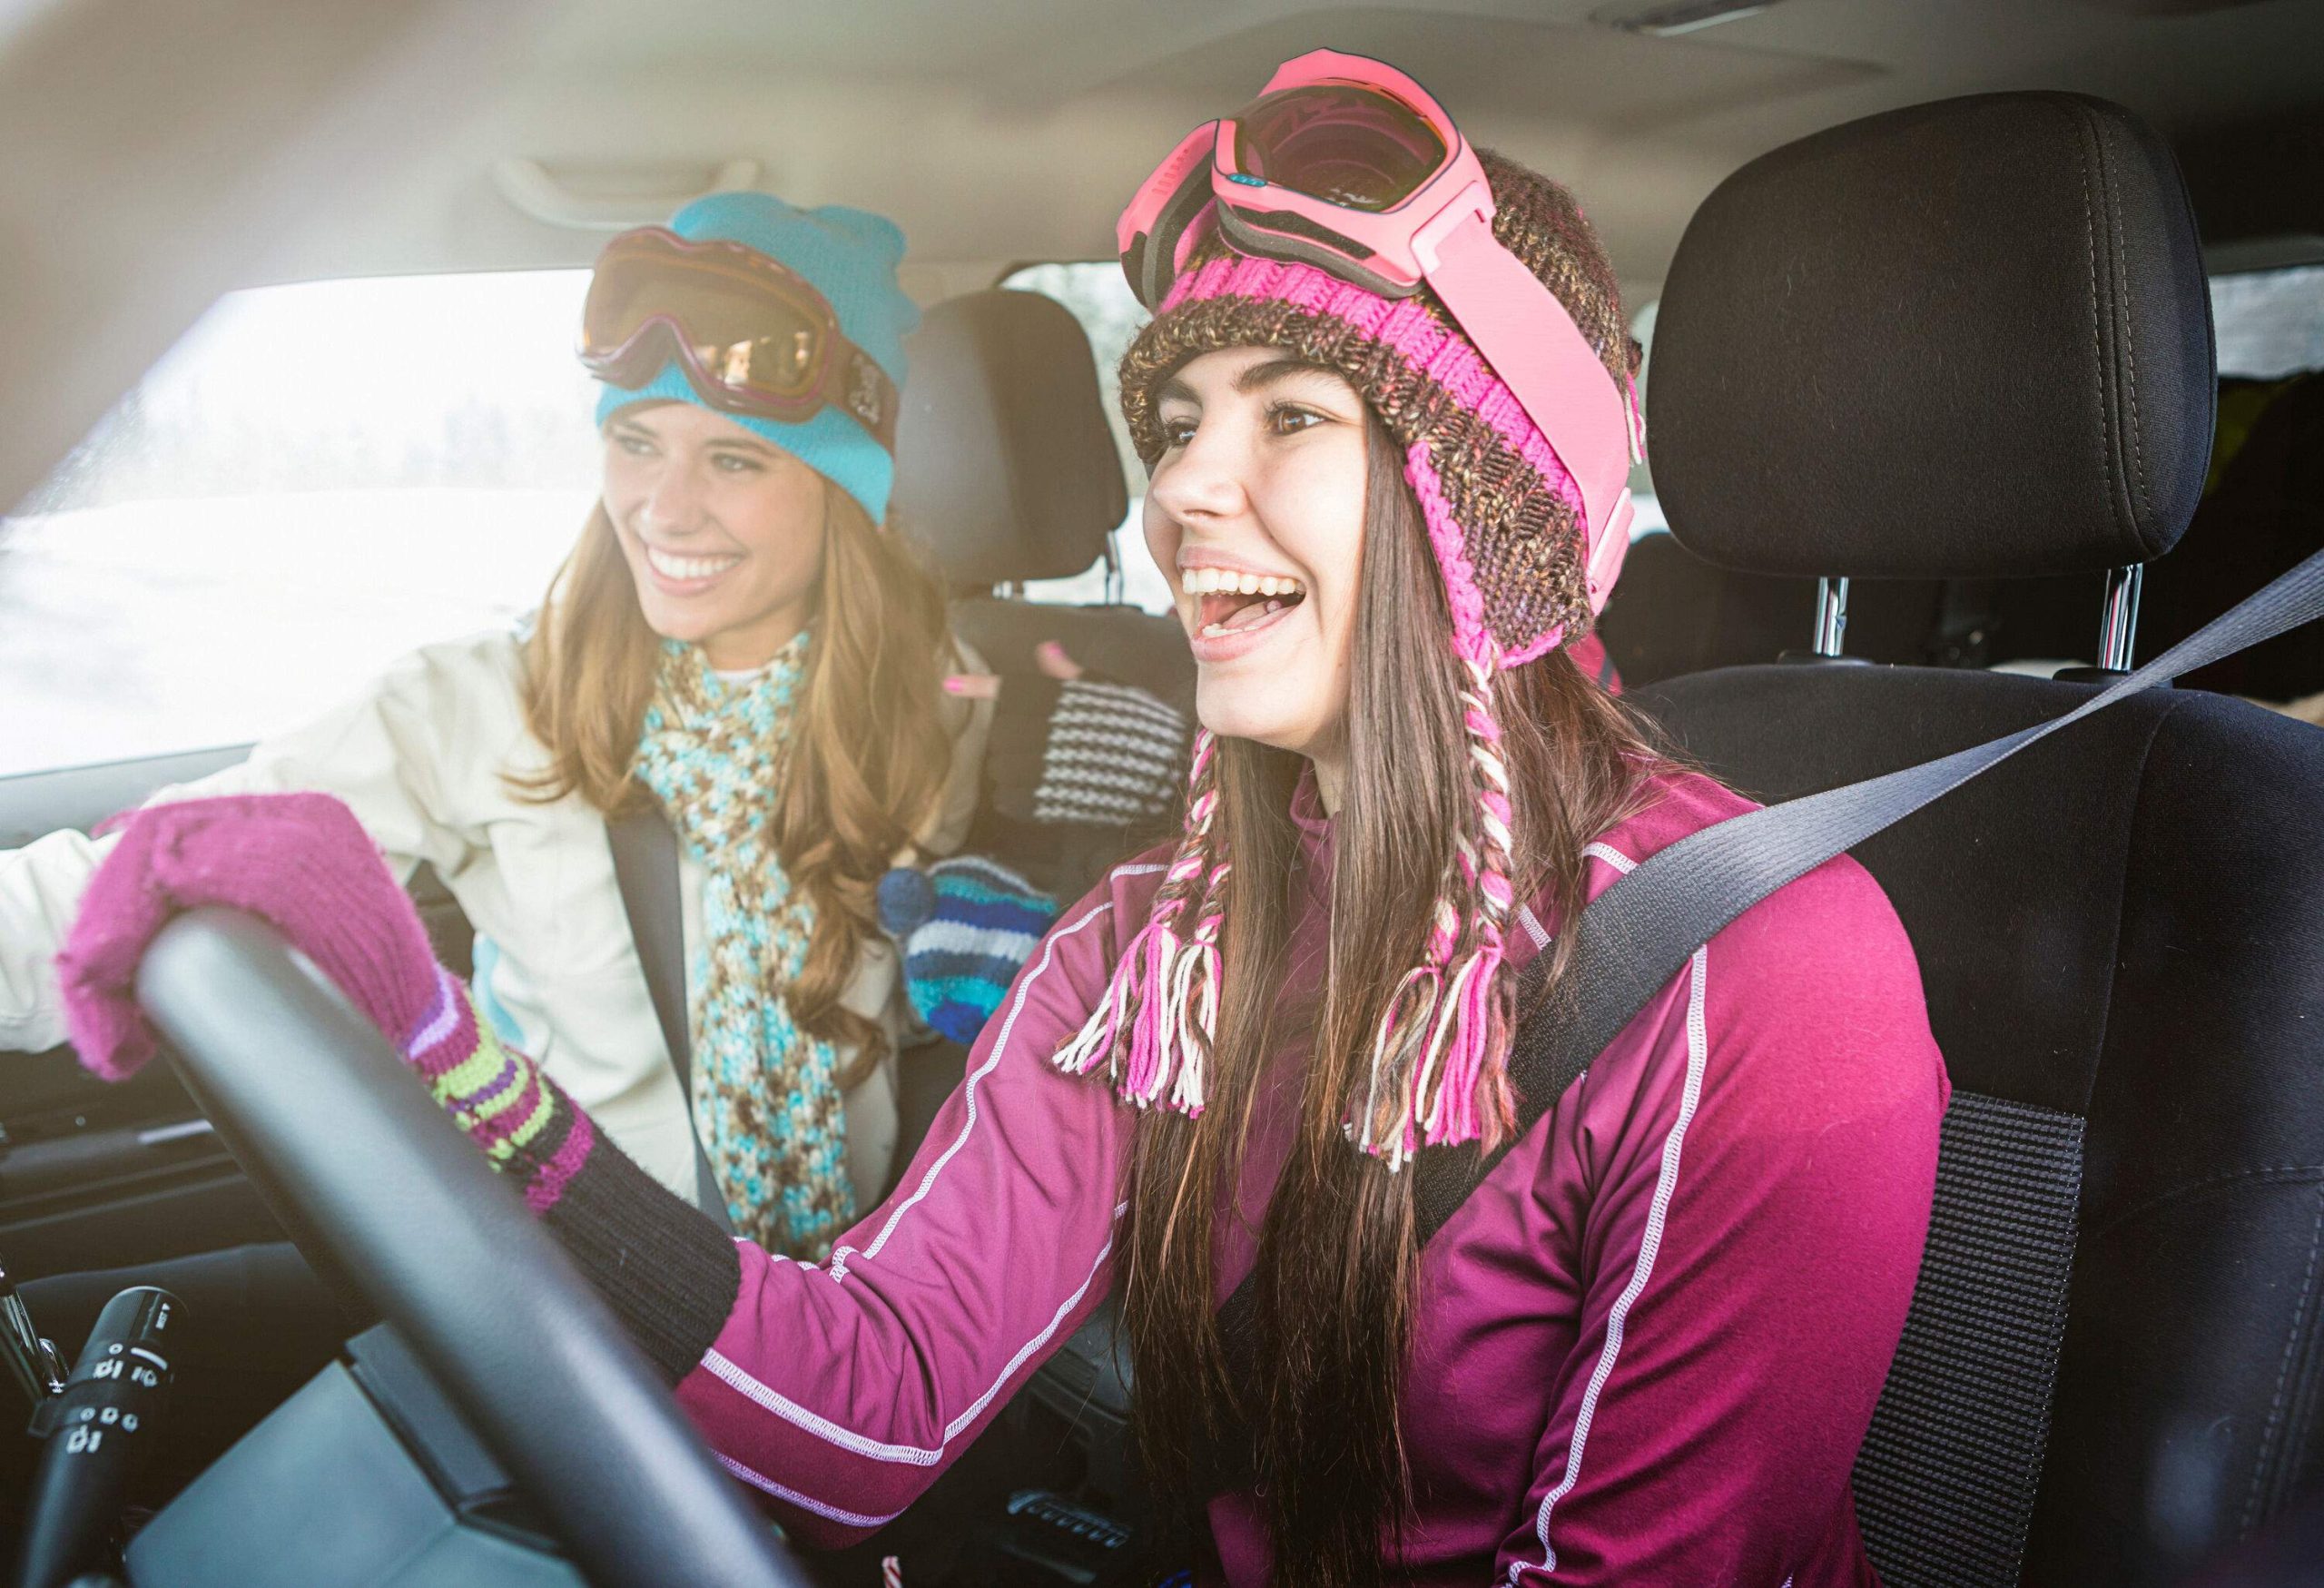 Two young women dressed for skiing laughing in the front seats of a car.